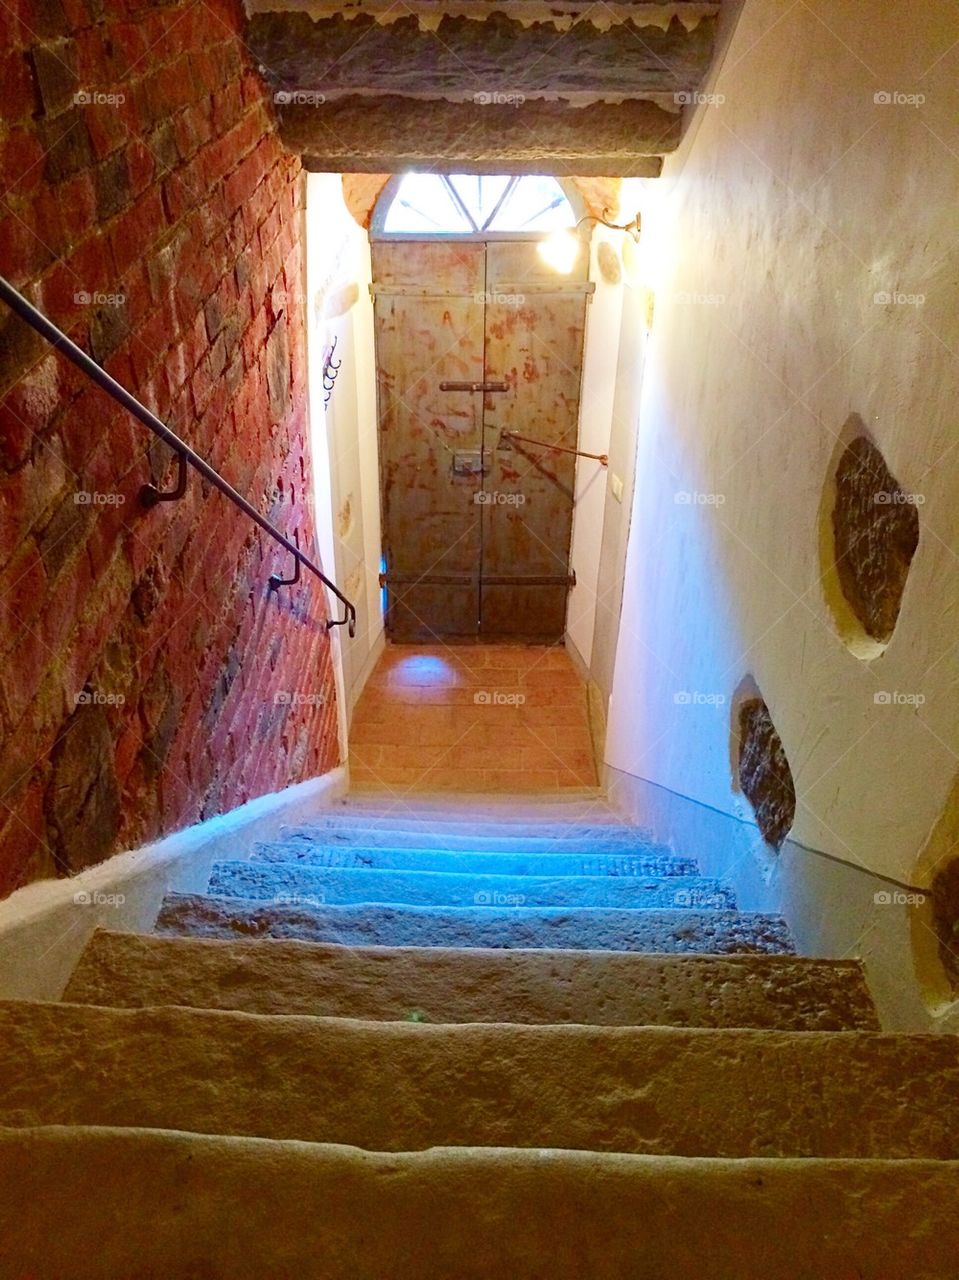 Tuscany house stairwell 